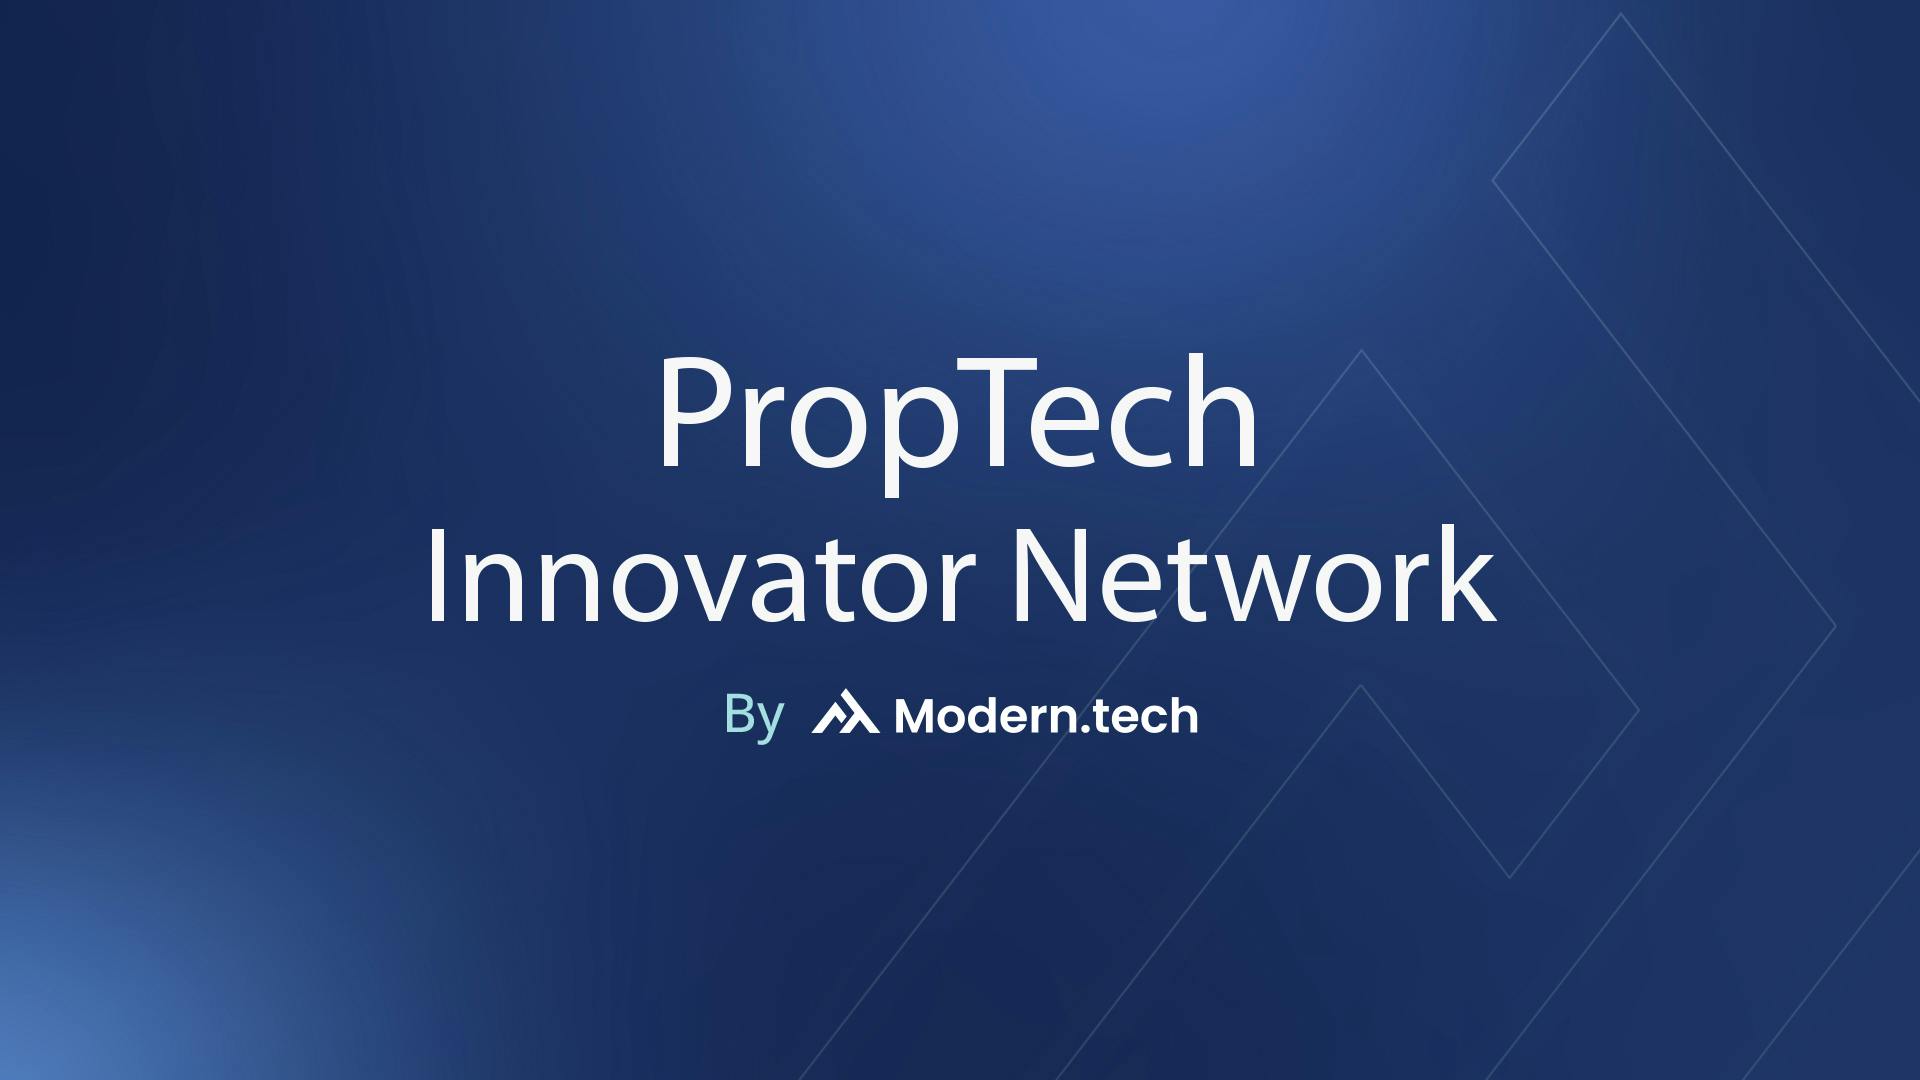 Modern.tech Launches the PropTech Innovator Network1